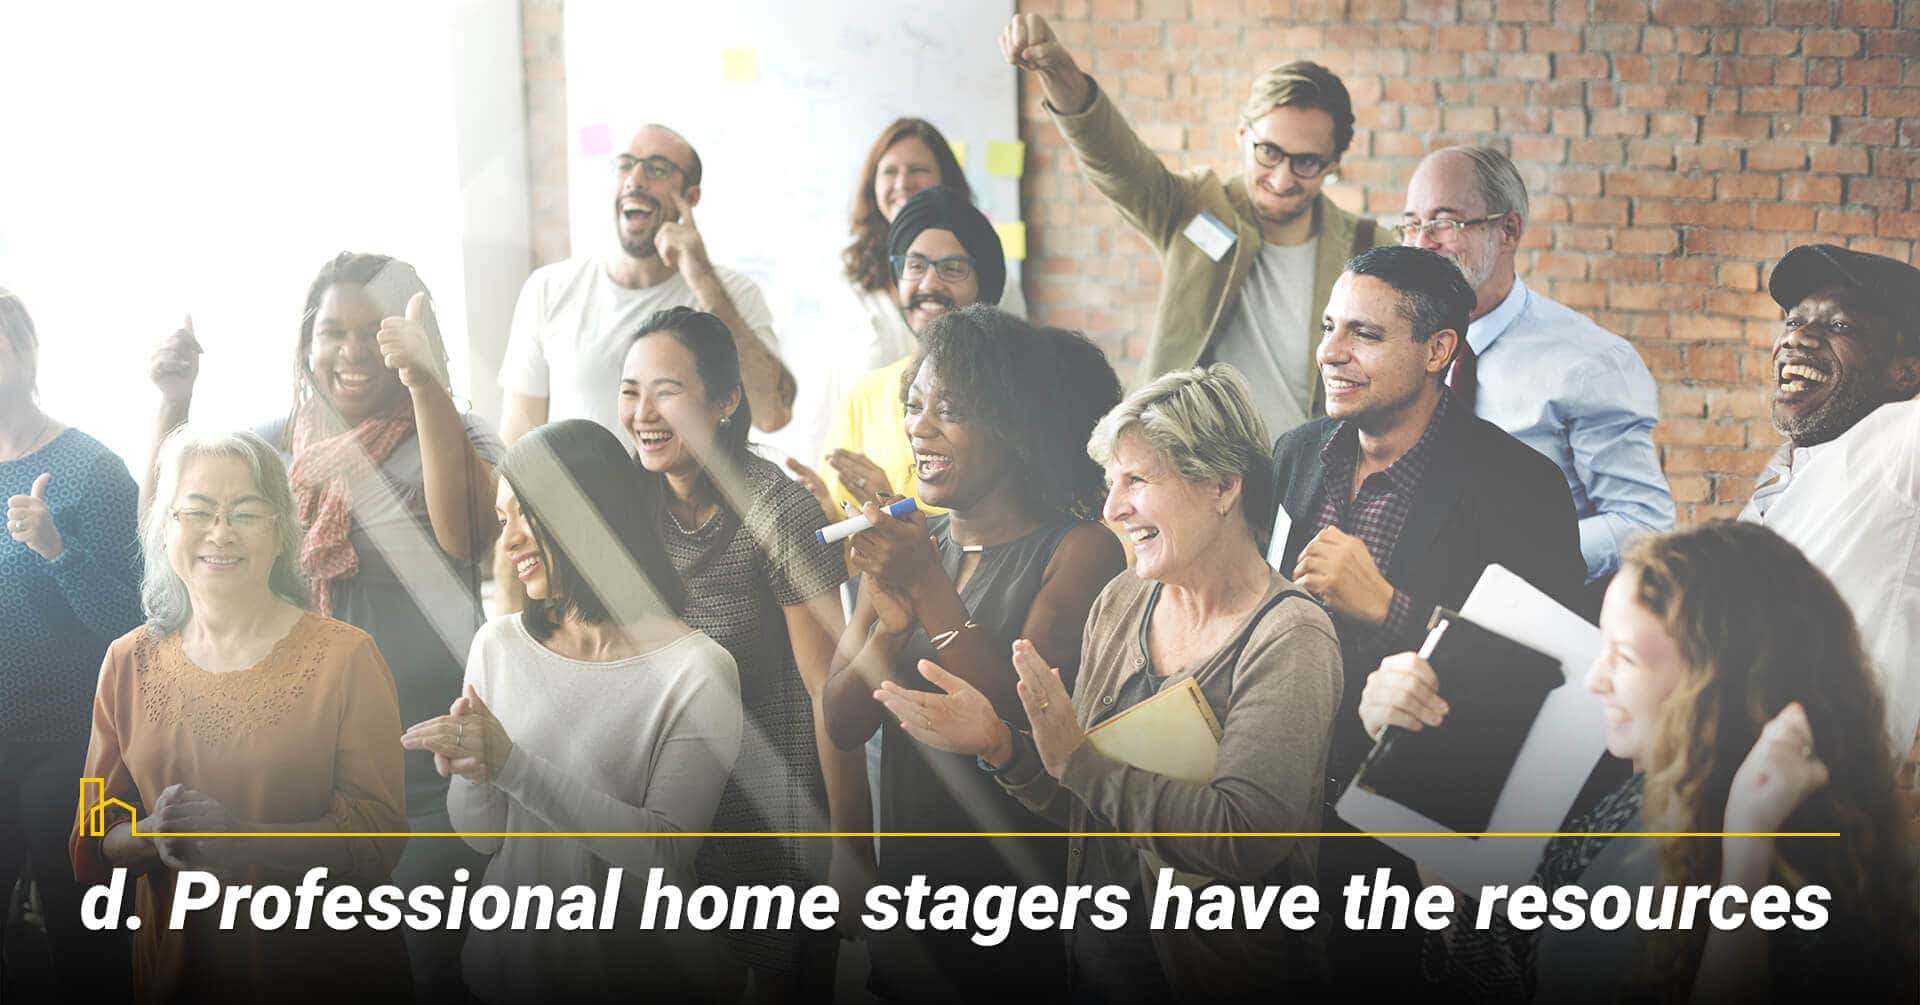 Professional home stagers have the resources, Professional home stagers are resourceful